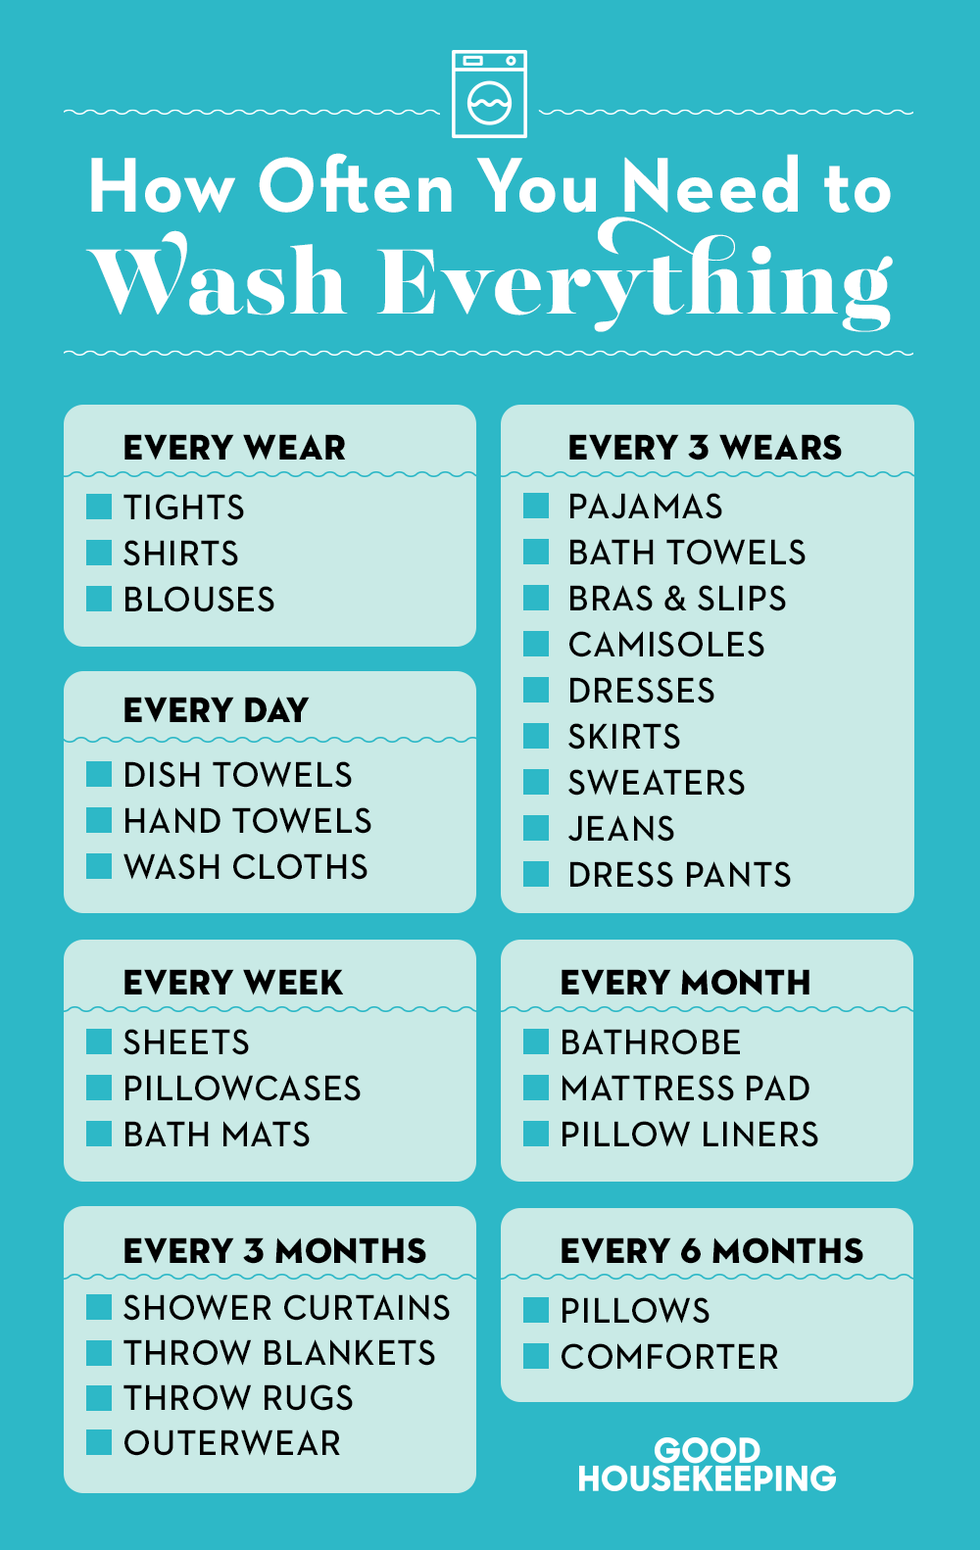 How often you should wash everything in your home, according to